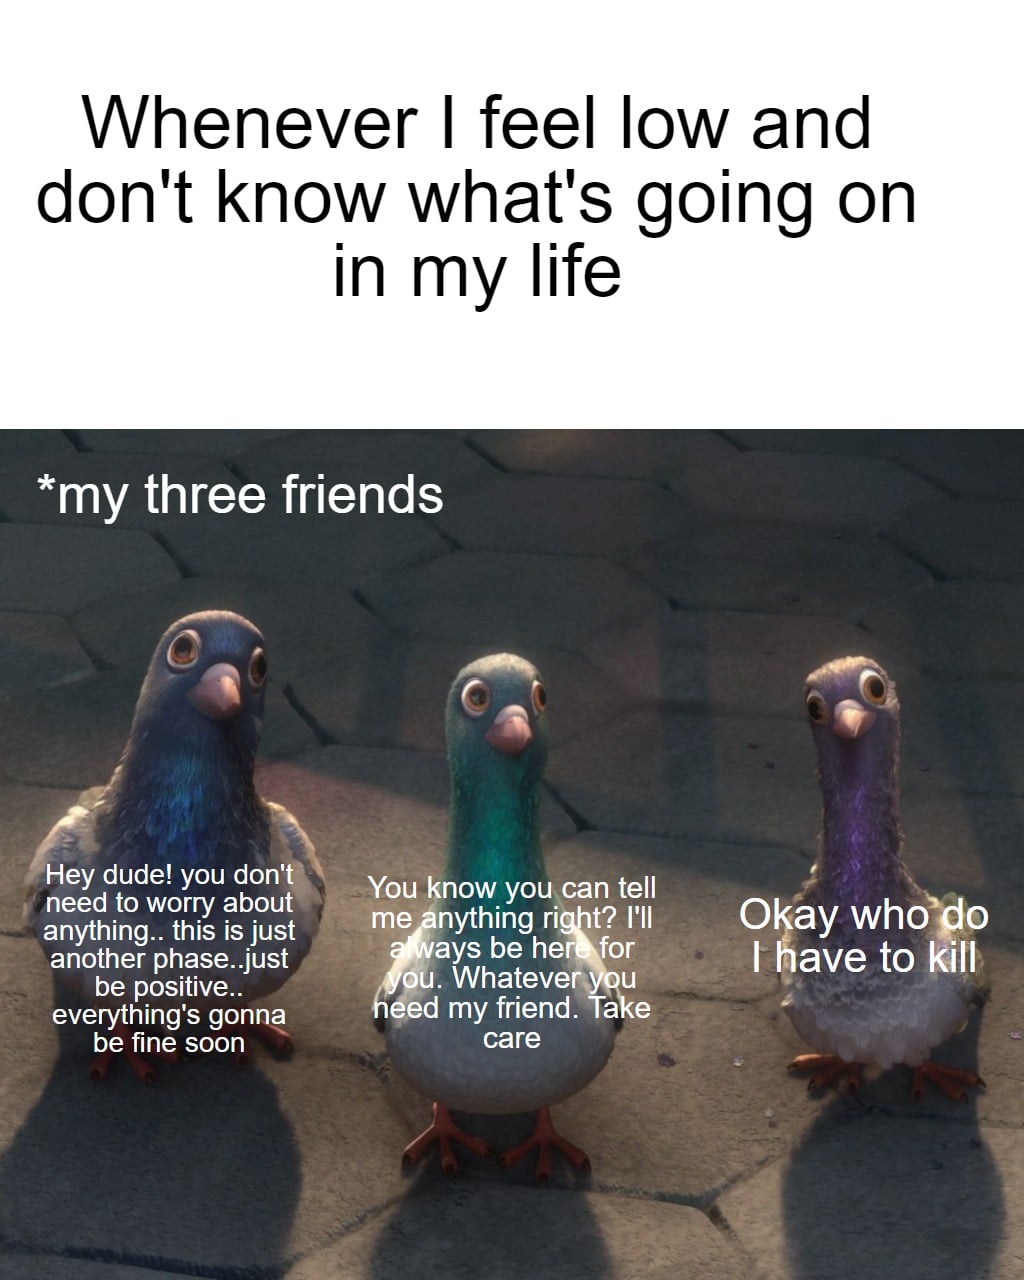 Wholesome memes, Okay, Bolt Wholesome Memes Wholesome memes, Okay, Bolt text: Whenever I feel low and don't know what's going on in my life *my three friends Hey dude! you donV need to worry about anything.. this is just another phase..just„ø be positive.. everything's gonne be fine soon You ow you\can tell me nything ri t? I'll ays be he for u. Whatever u d my friend. a e care Okay I have to kill 